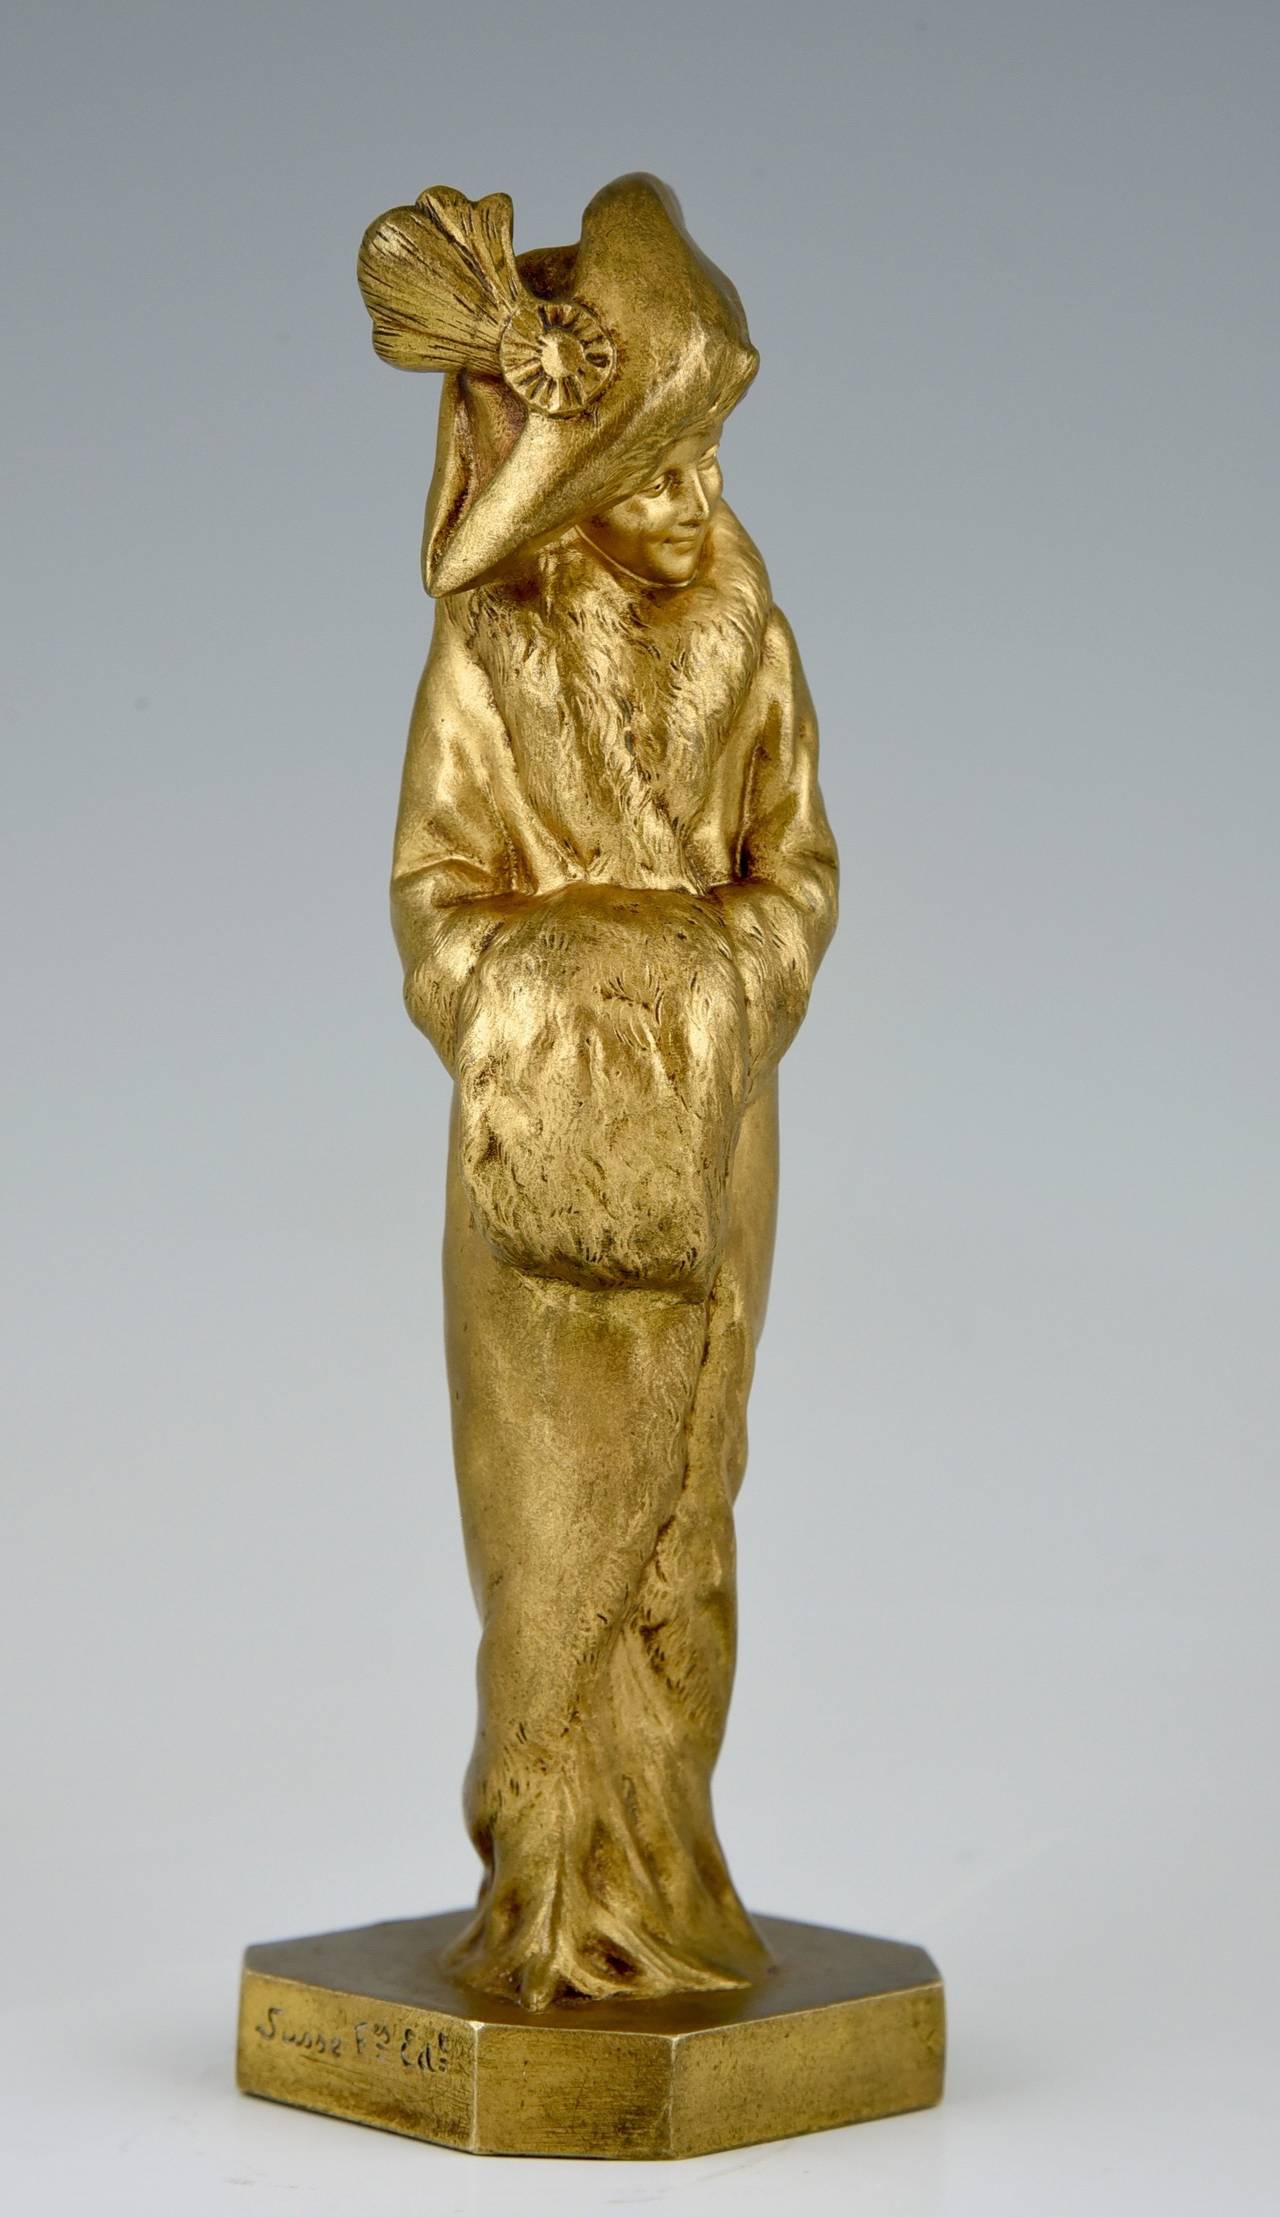 Gilt French Art Deco Bronze Sculpture of a Lady by Guiraud Riviere, 1925